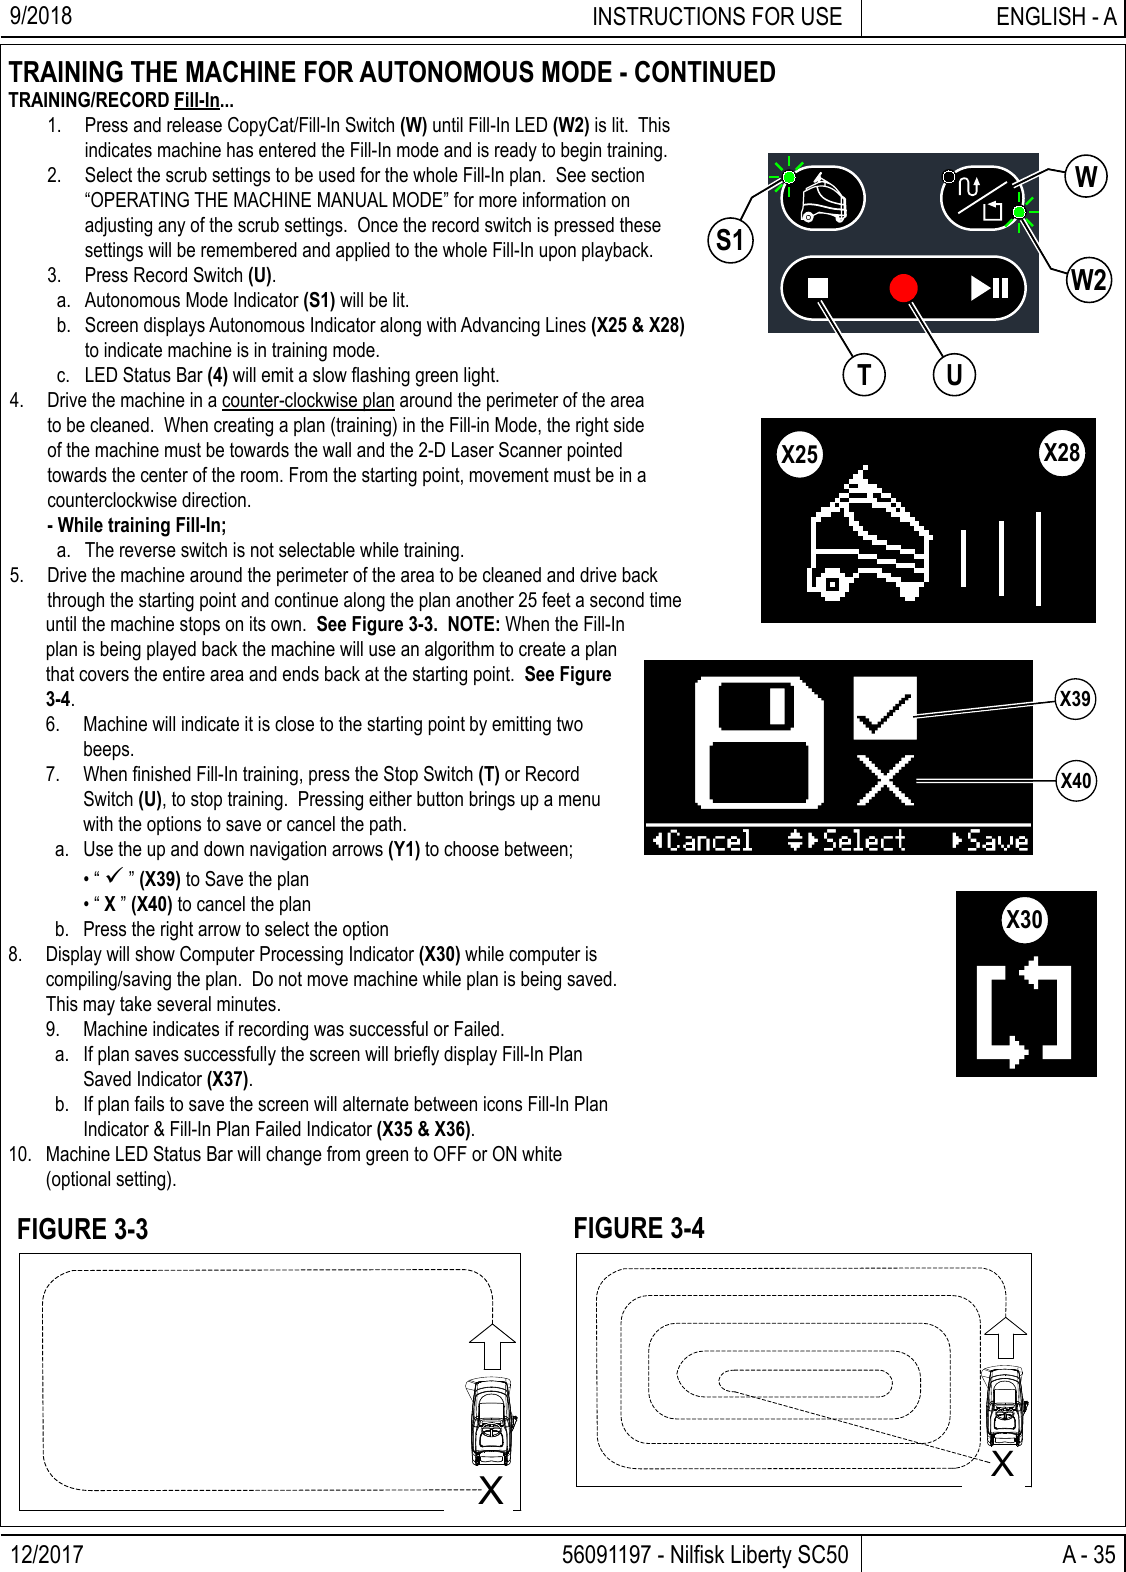 12/2017 A - 35 56091197 - Nilﬁ sk Liberty SC50ENGLISH - AINSTRUCTIONS FOR USE9/20181.  Press and release CopyCat/Fill-In Switch (W) until Fill-In LED (W2) is lit.  This indicates machine has entered the Fill-In mode and is ready to begin training.2.  Select the scrub settings to be used for the whole Fill-In plan.  See section “OPERATING THE MACHINE MANUAL MODE” for more information on adjusting any of the scrub settings.  Once the record switch is pressed these settings will be remembered and applied to the whole Fill-In upon playback.3.  Press Record Switch (U).a.  Autonomous Mode Indicator (S1) will be lit.b.  Screen displays Autonomous Indicator along with Advancing Lines (X25 &amp; X28) to indicate machine is in training mode.c.  LED Status Bar (4) will emit a slow ﬂ ashing green light.4.  Drive the machine in a counter-clockwise plan around the perimeter of the area to be cleaned.  When creating a plan (training) in the Fill-in Mode, the right side of the machine must be towards the wall and the 2-D Laser Scanner pointed towards the center of the room. From the starting point, movement must be in a counterclockwise direction.  - While training Fill-In;a.  The reverse switch is not selectable while training.5.  Drive the machine around the perimeter of the area to be cleaned and drive back through the starting point and continue along the plan another 25 feet a second time TRAINING THE MACHINE FOR AUTONOMOUS MODE - CONTINUEDTRAINING/RECORD Fill-In...WW2UTS1Xuntil the machine stops on its own.  See Figure 3-3.  NOTE: When the Fill-In plan is being played back the machine will use an algorithm to create a plan that covers the entire area and ends back at the starting point.  See Figure 3-4.6.  Machine will indicate it is close to the starting point by emitting two beeps.7. When ﬁ nished Fill-In training, press the Stop Switch (T) or Record Switch (U), to stop training.  Pressing either button brings up a menu with the options to save or cancel the path.a.  Use the up and down navigation arrows (Y1) to choose between; • “  ” (X39) to Save the plan • “ X ” (X40) to cancel the planb.  Press the right arrow to select the option8.  Display will show Computer Processing Indicator (X30) while computer is compiling/saving the plan.  Do not move machine while plan is being saved.  This may take several minutes.9.  Machine indicates if recording was successful or Failed.a.  If plan saves successfully the screen will brieﬂ y display Fill-In Plan Saved Indicator (X37).b.  If plan fails to save the screen will alternate between icons Fill-In Plan Indicator &amp; Fill-In Plan Failed Indicator (X35 &amp; X36).10.  Machine LED Status Bar will change from green to OFF or ON white (optional setting).XFIGURE 3-4FIGURE 3-3X25 X28X39X40X30